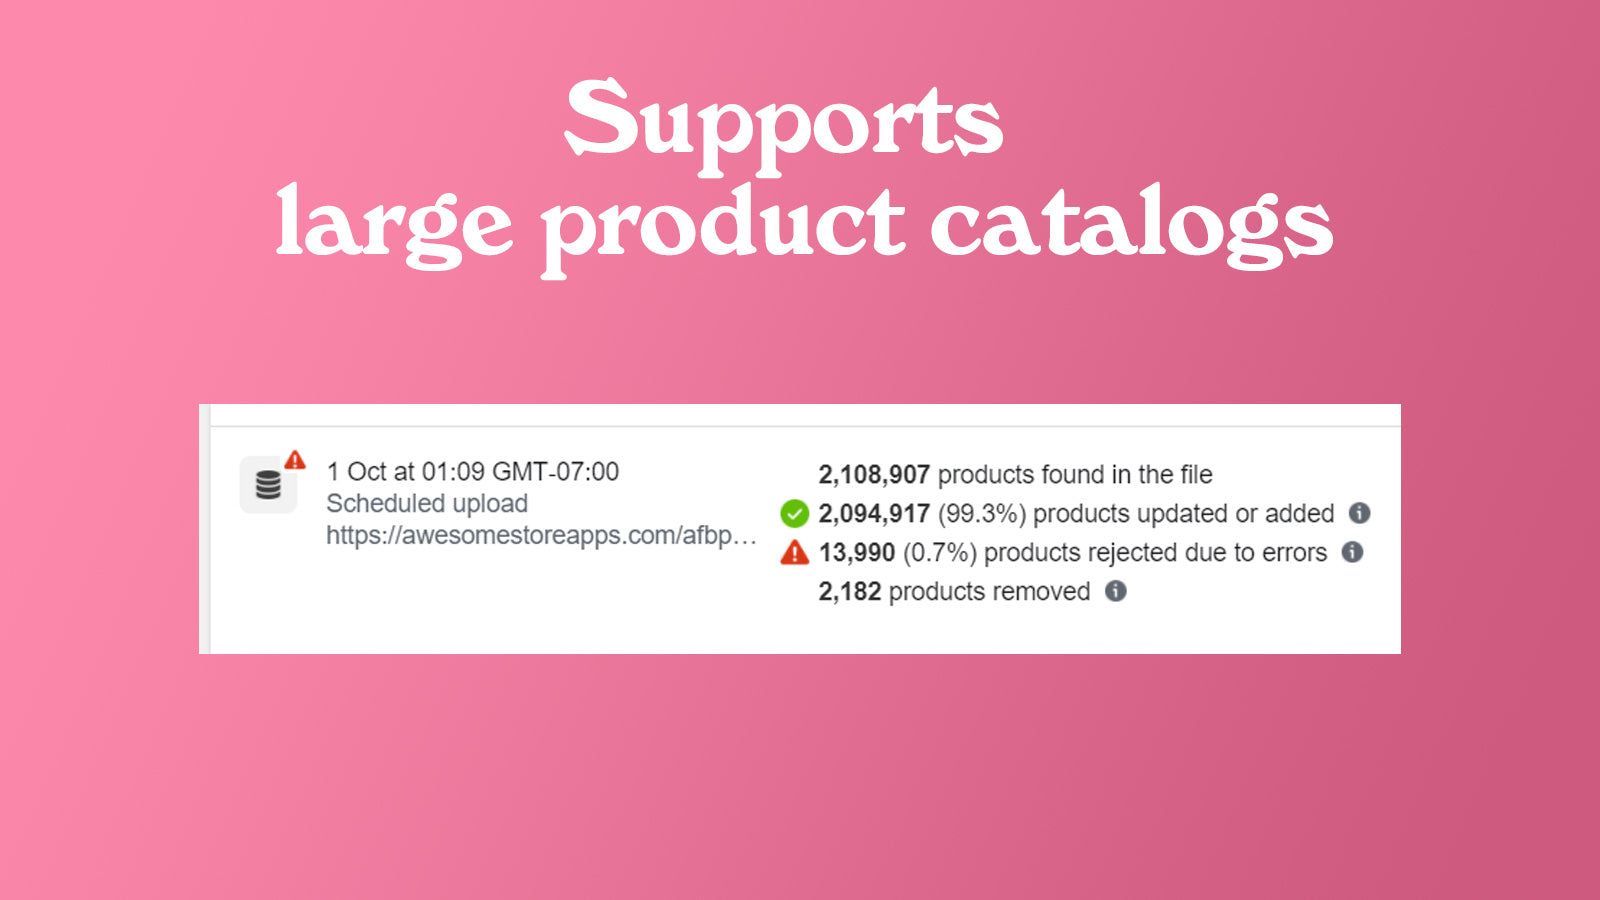 Tested for large product catalogs - more than 2,000,000 products